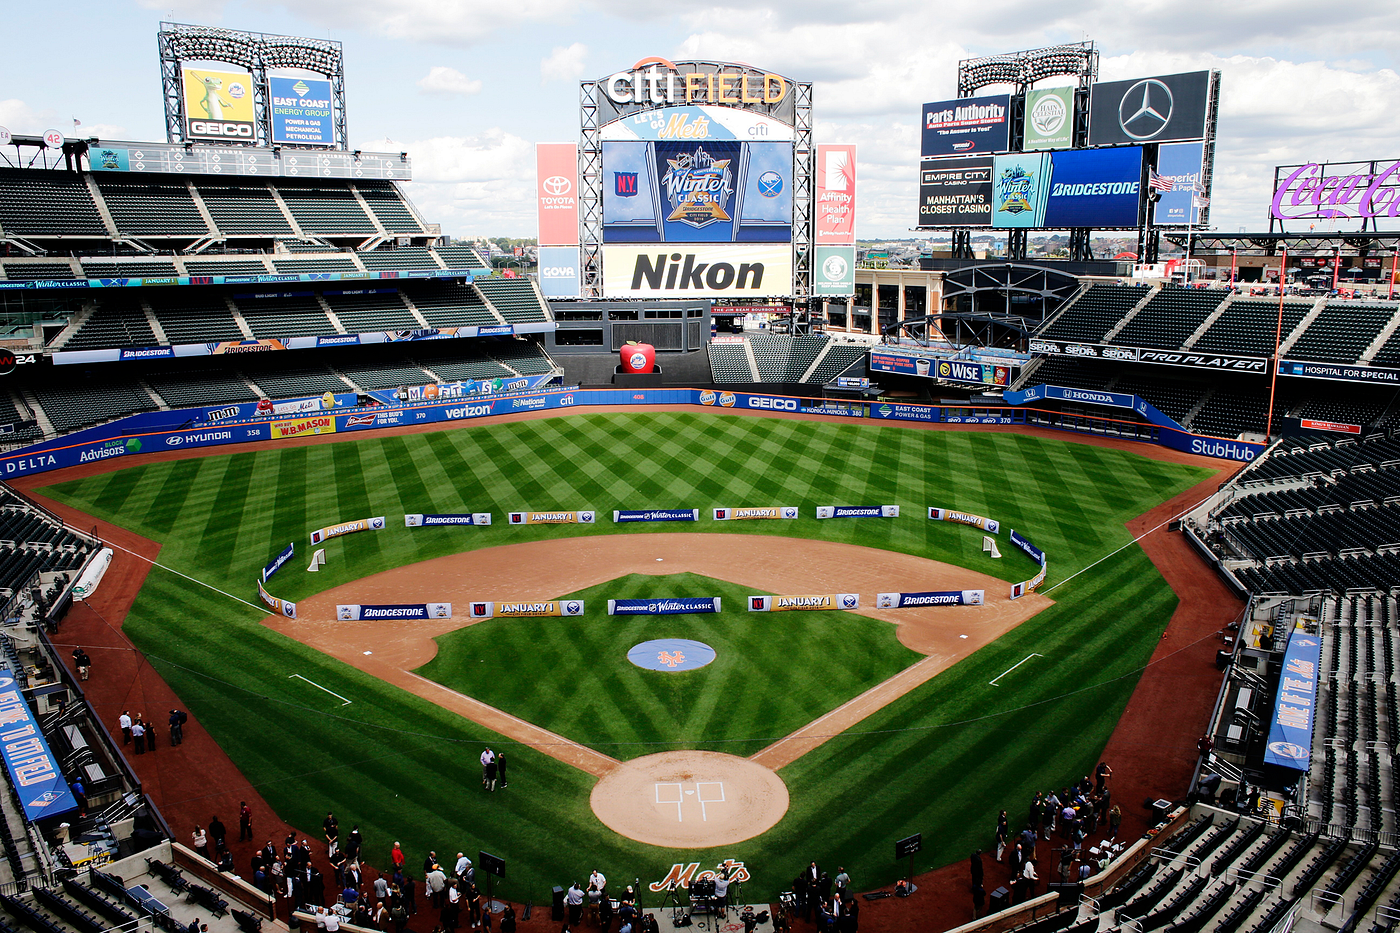 How to Get to Citi Field